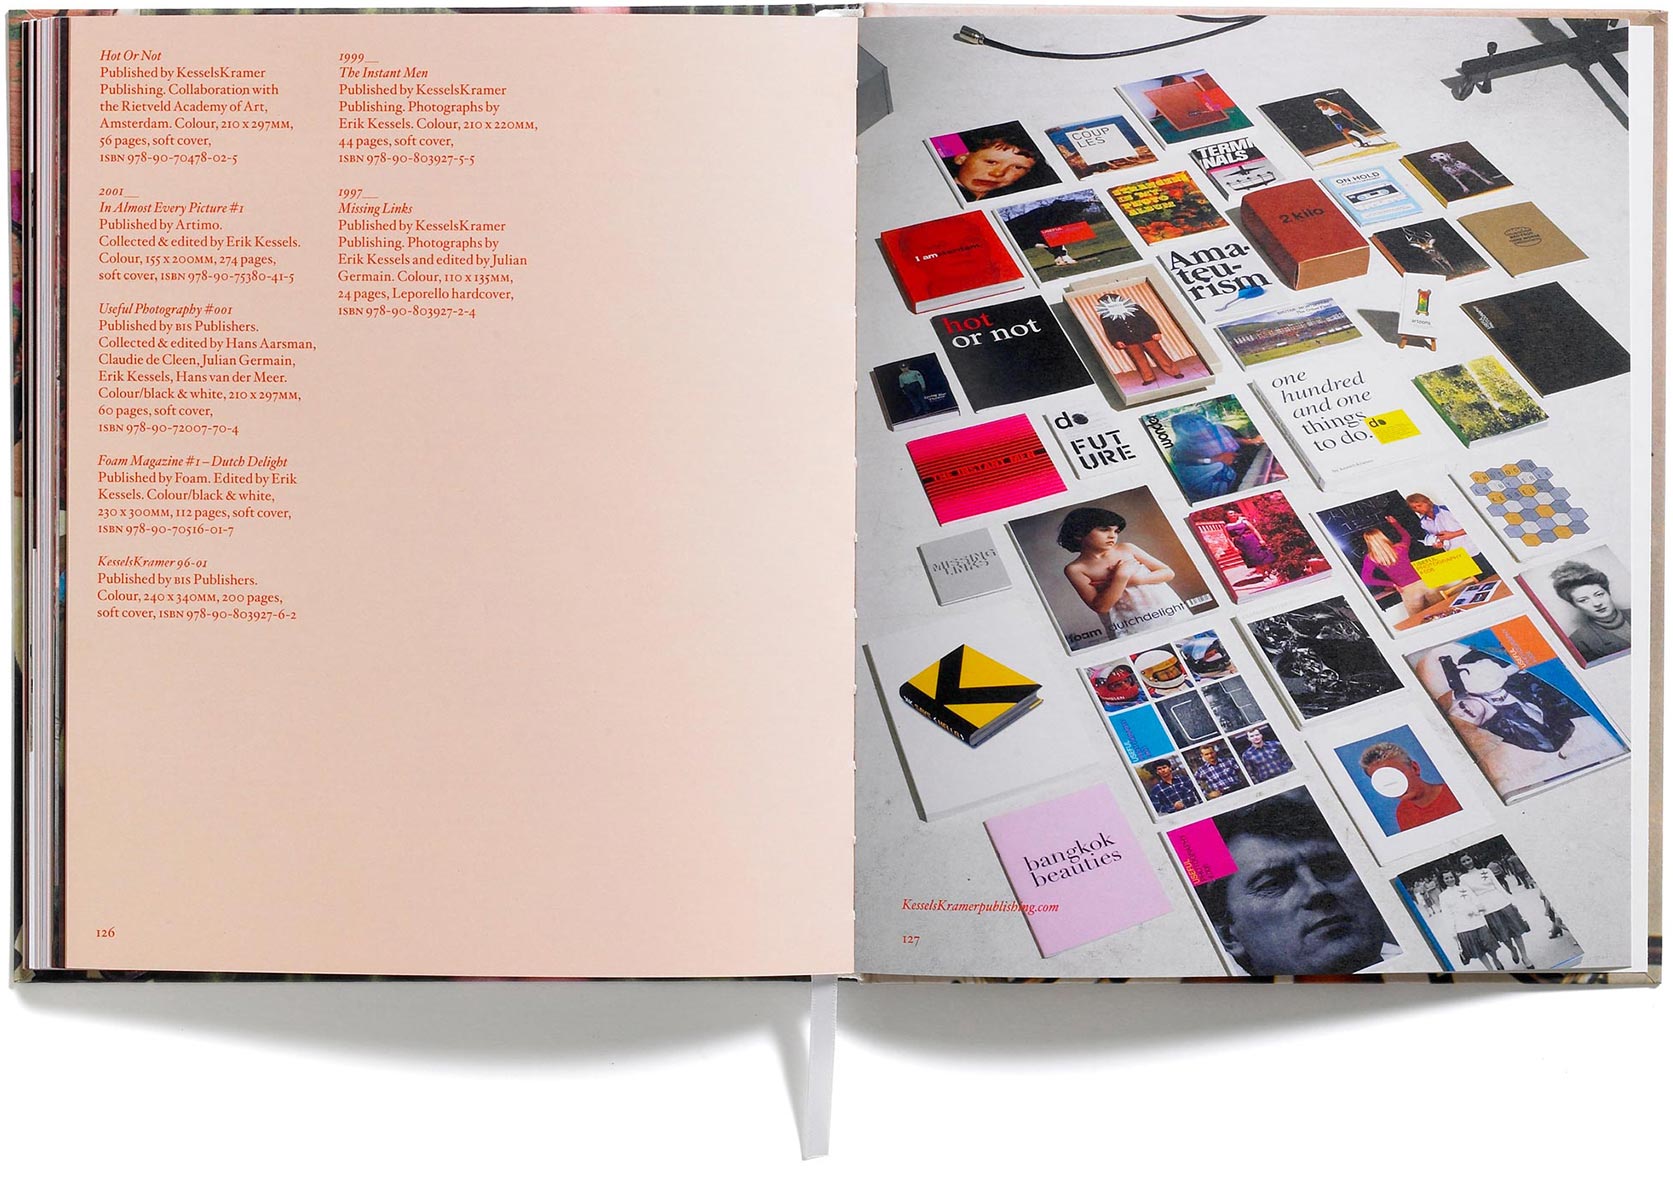 Browns Editions, Browns Editions Publishing, Browns Editions Books, Browns Editions Erik Kessels, Browns Editions HSP Lecture Series 7, Browns Editions Erik Kessels HSP Lecture Series 7